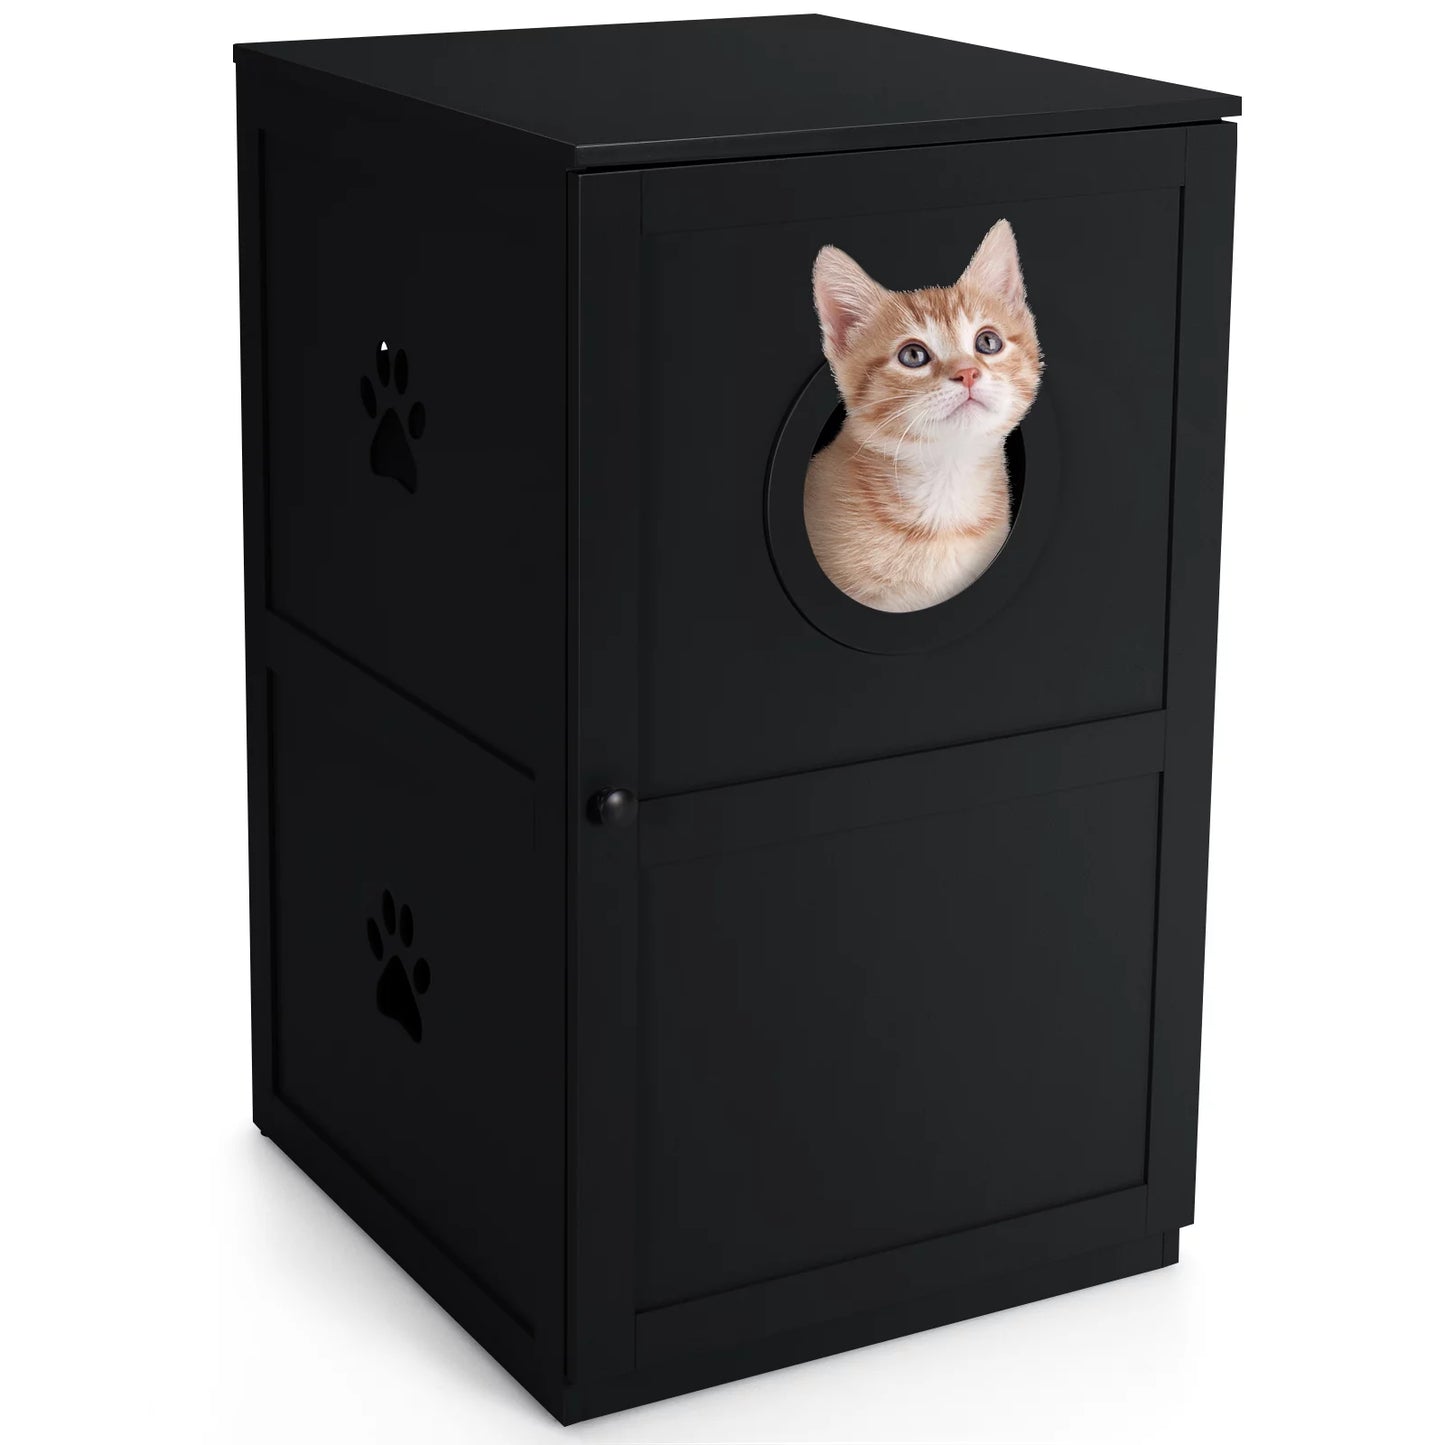 Infans 2-Tier Litter Box Enclosure Furniture Hidden Cat House W/ Anti-Toppling Device